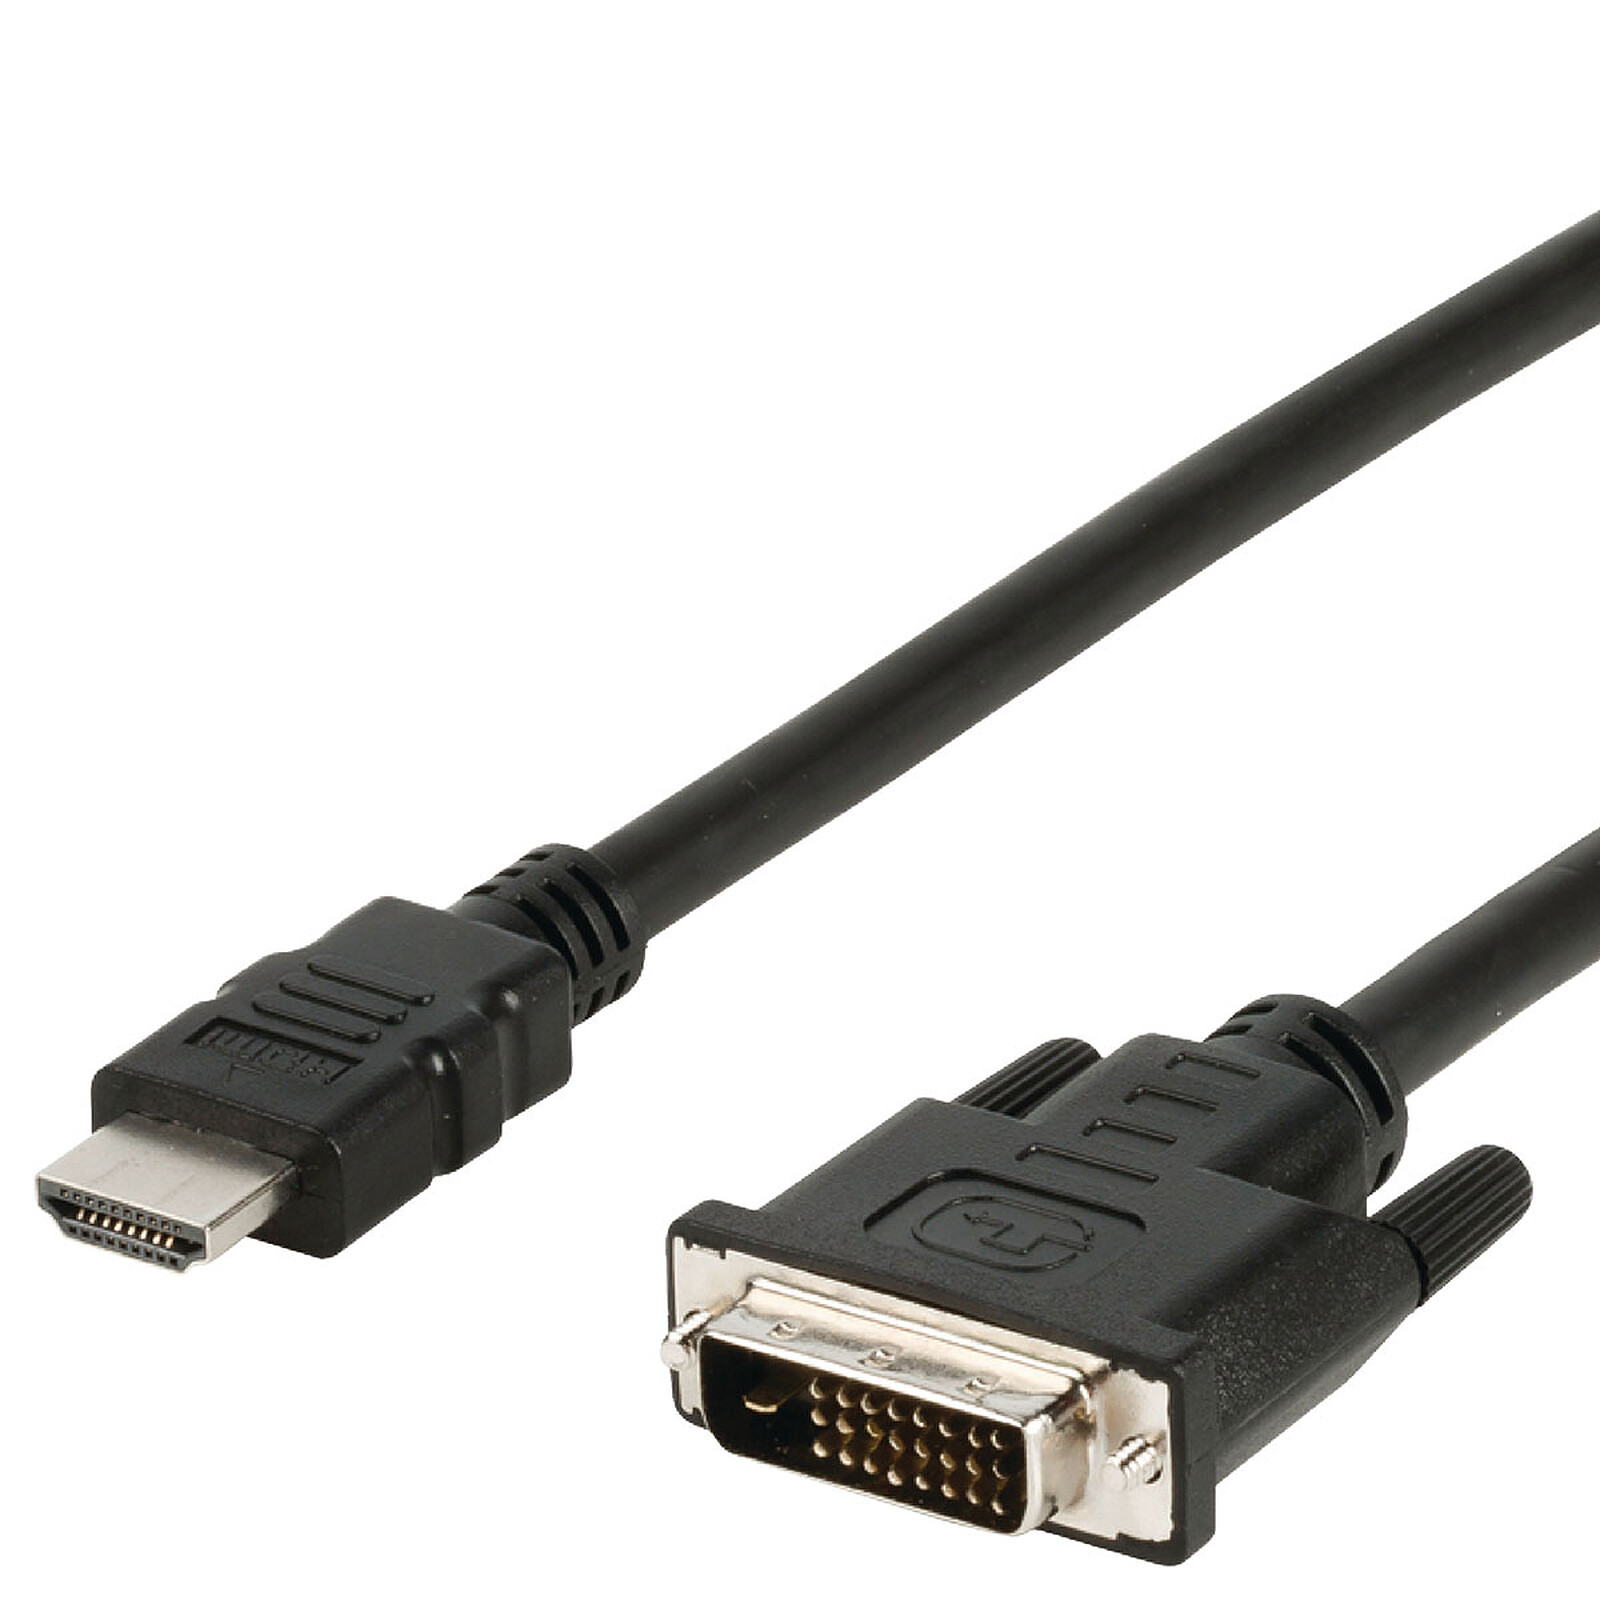 DVI-D Dual Link Male / HDMI Male Cable (2 meters) - DVI on LDLC